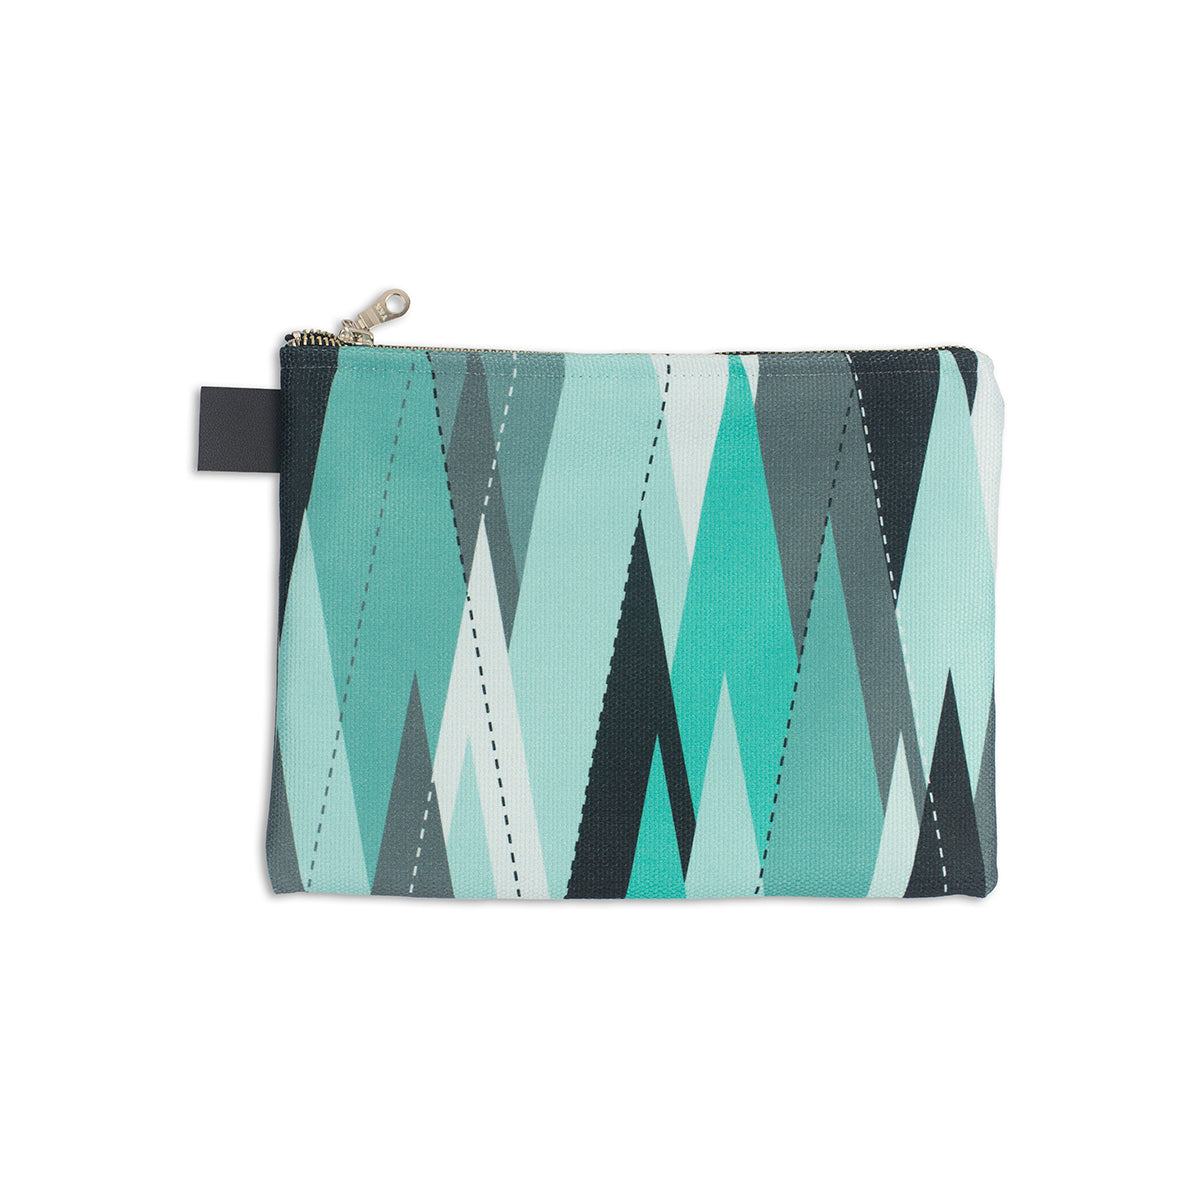 10.5 x 8" zip pouch with abstract triangle pattern in shades of green resembling trees